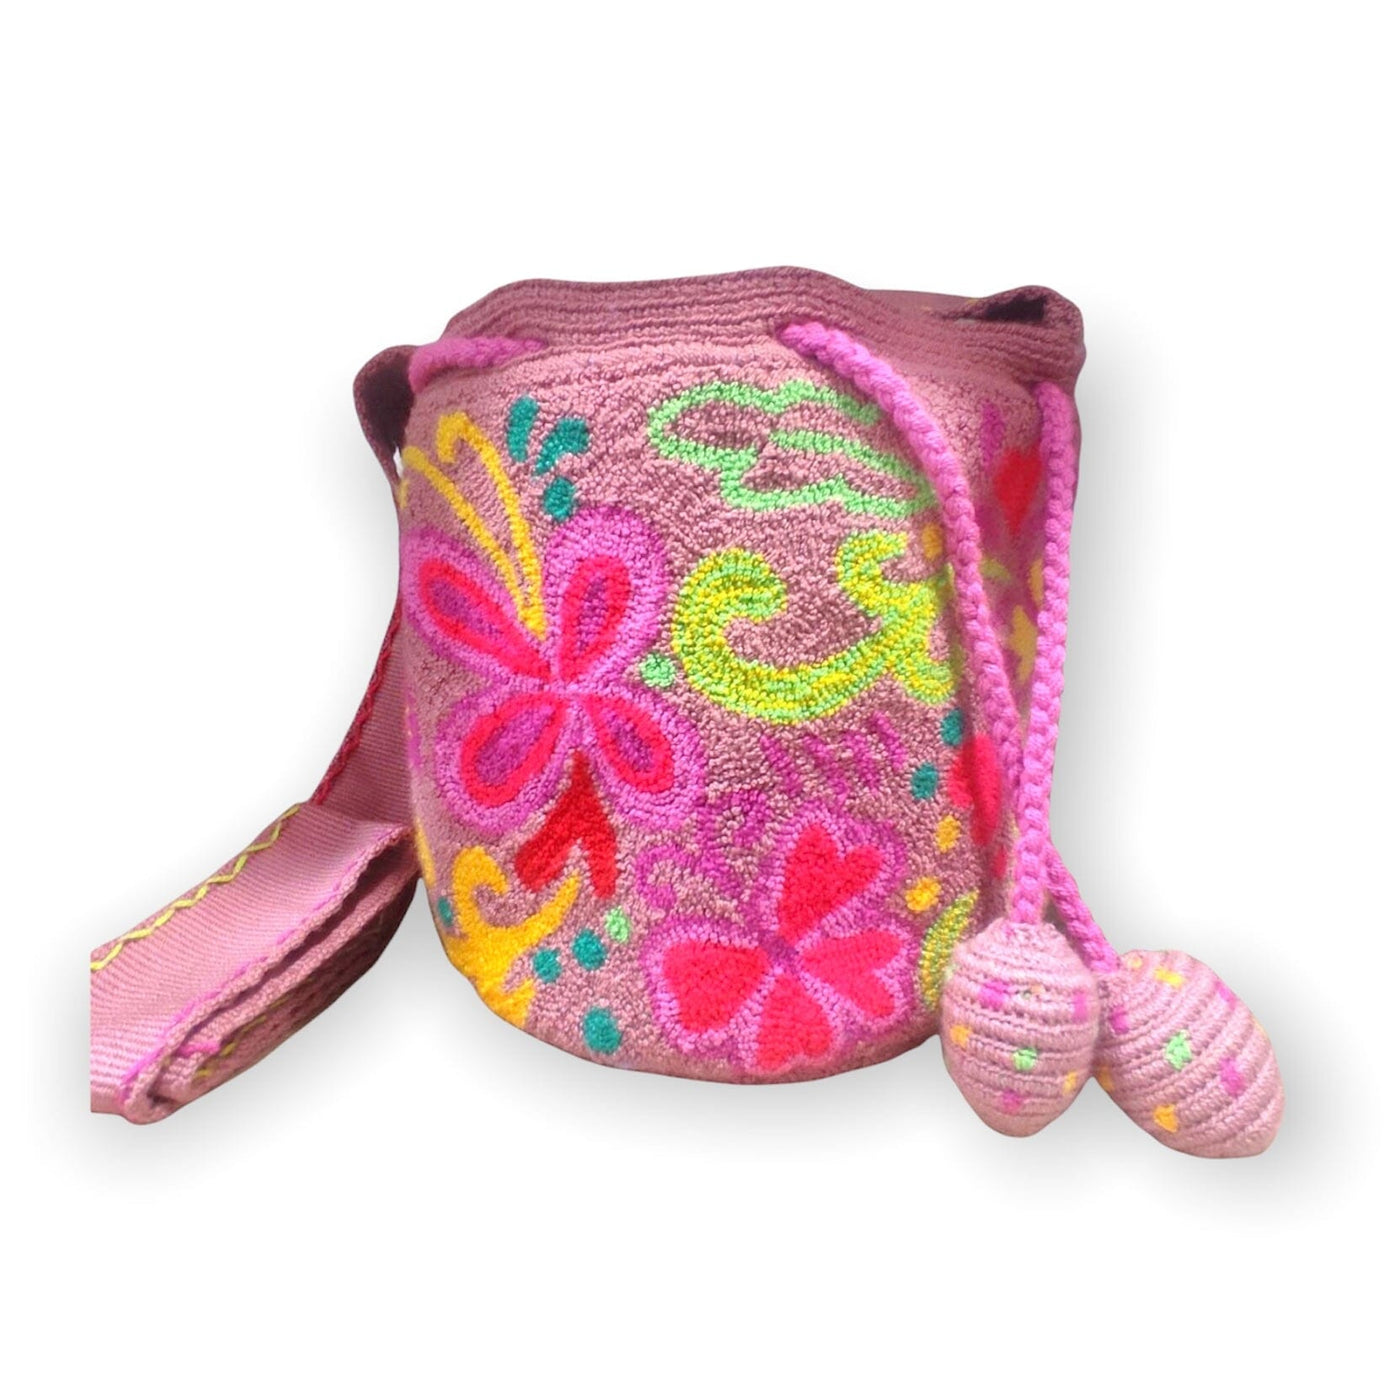 Mirabel Encanto Bag | Authentic Colombian Bag by Colorful 4U Tapestry 